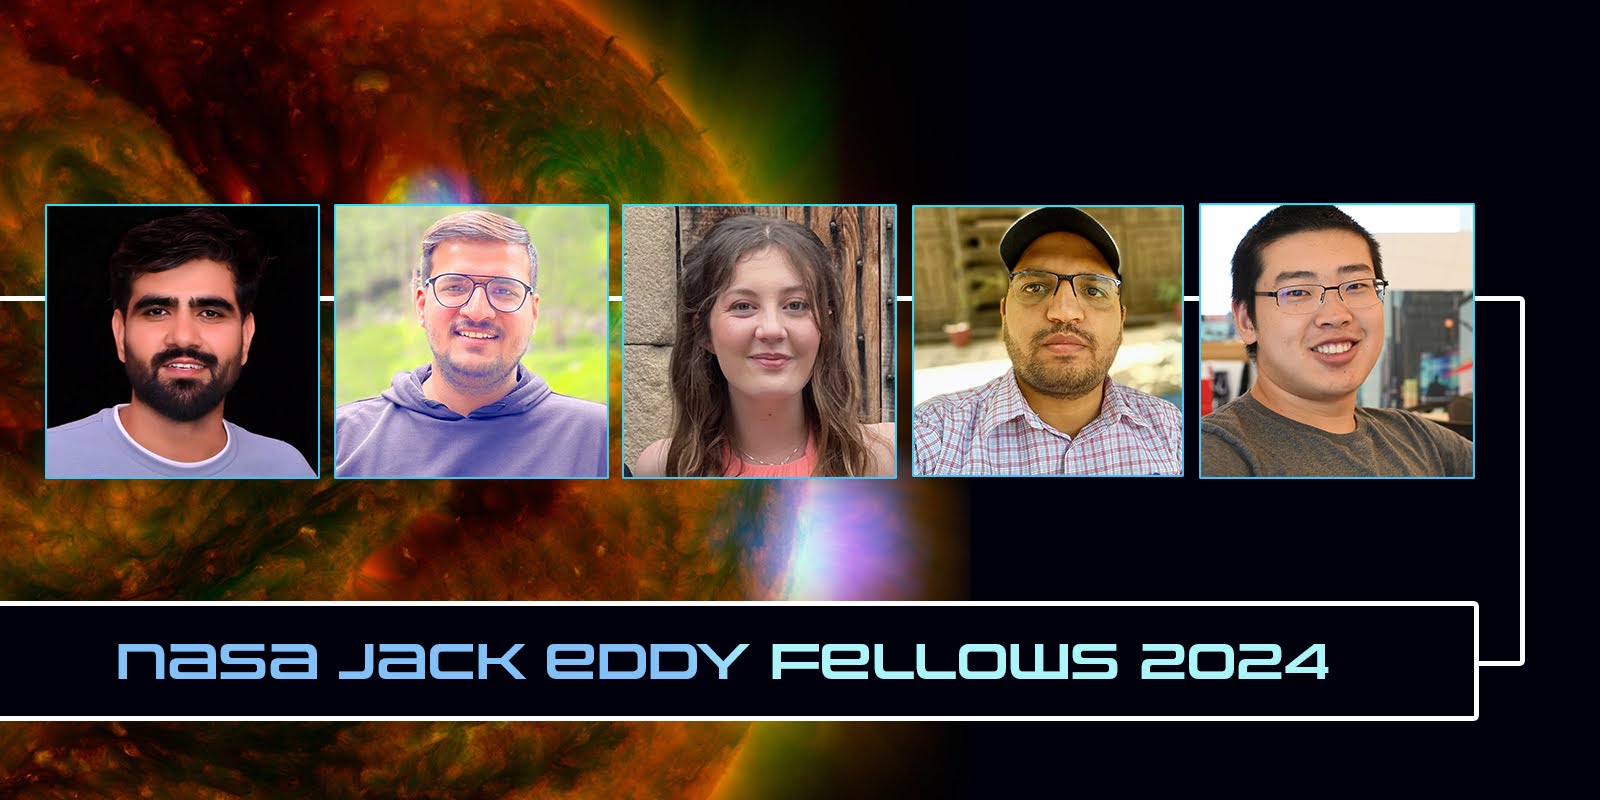 In the background, there is an image of an orange and blue Sun. On top, there are five images showing people from the shoulders up, smiling at the camera. Below the images are the words "NASA Jack Eddy Fellows 2024"